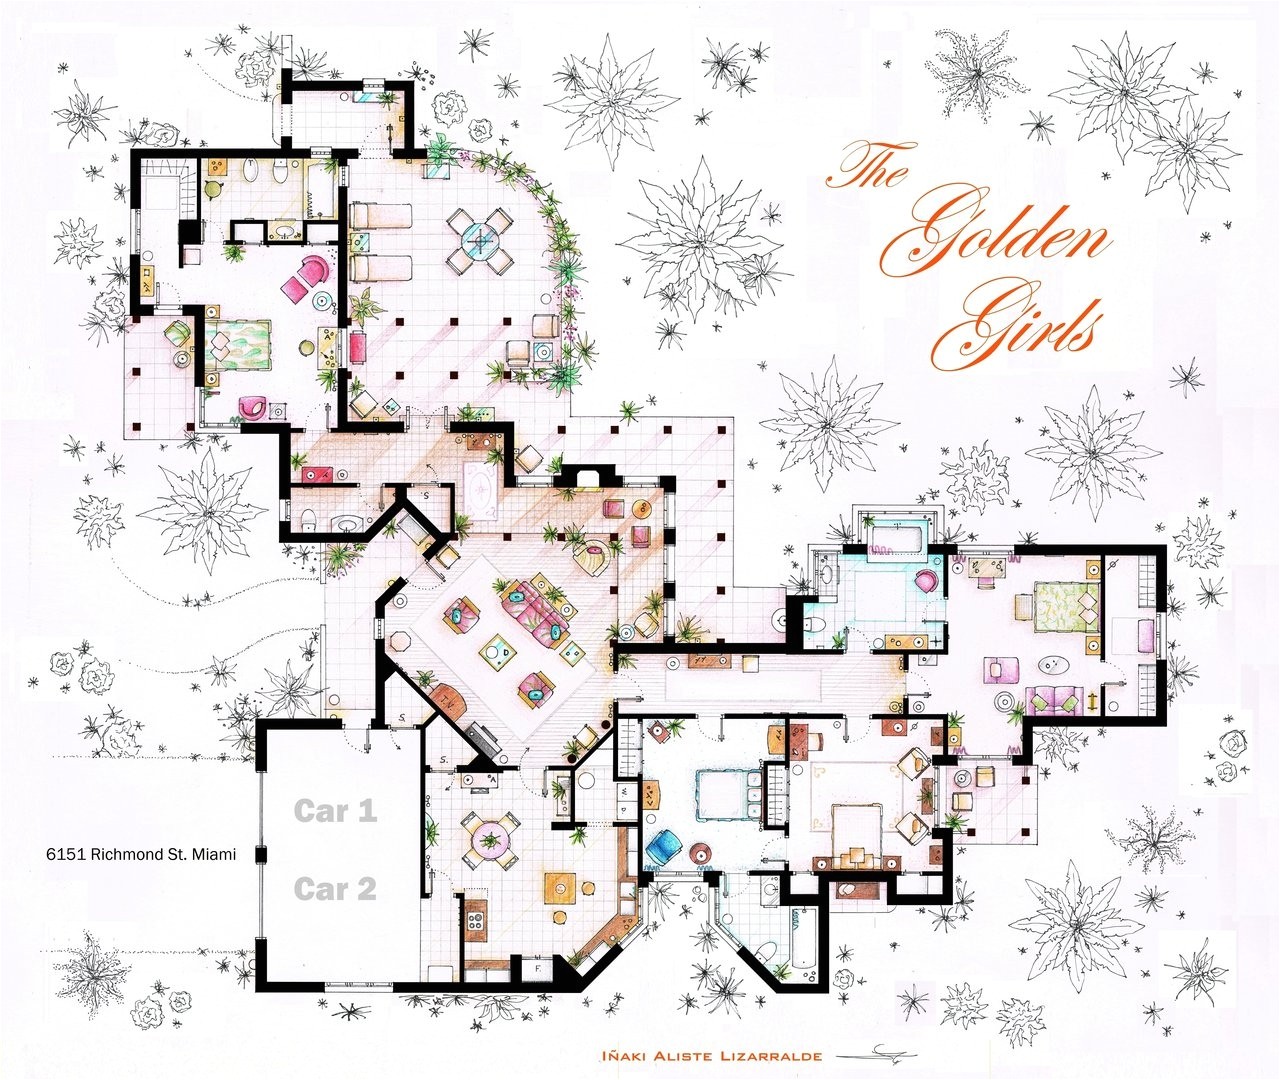 floor plans of homes from famous tv shows